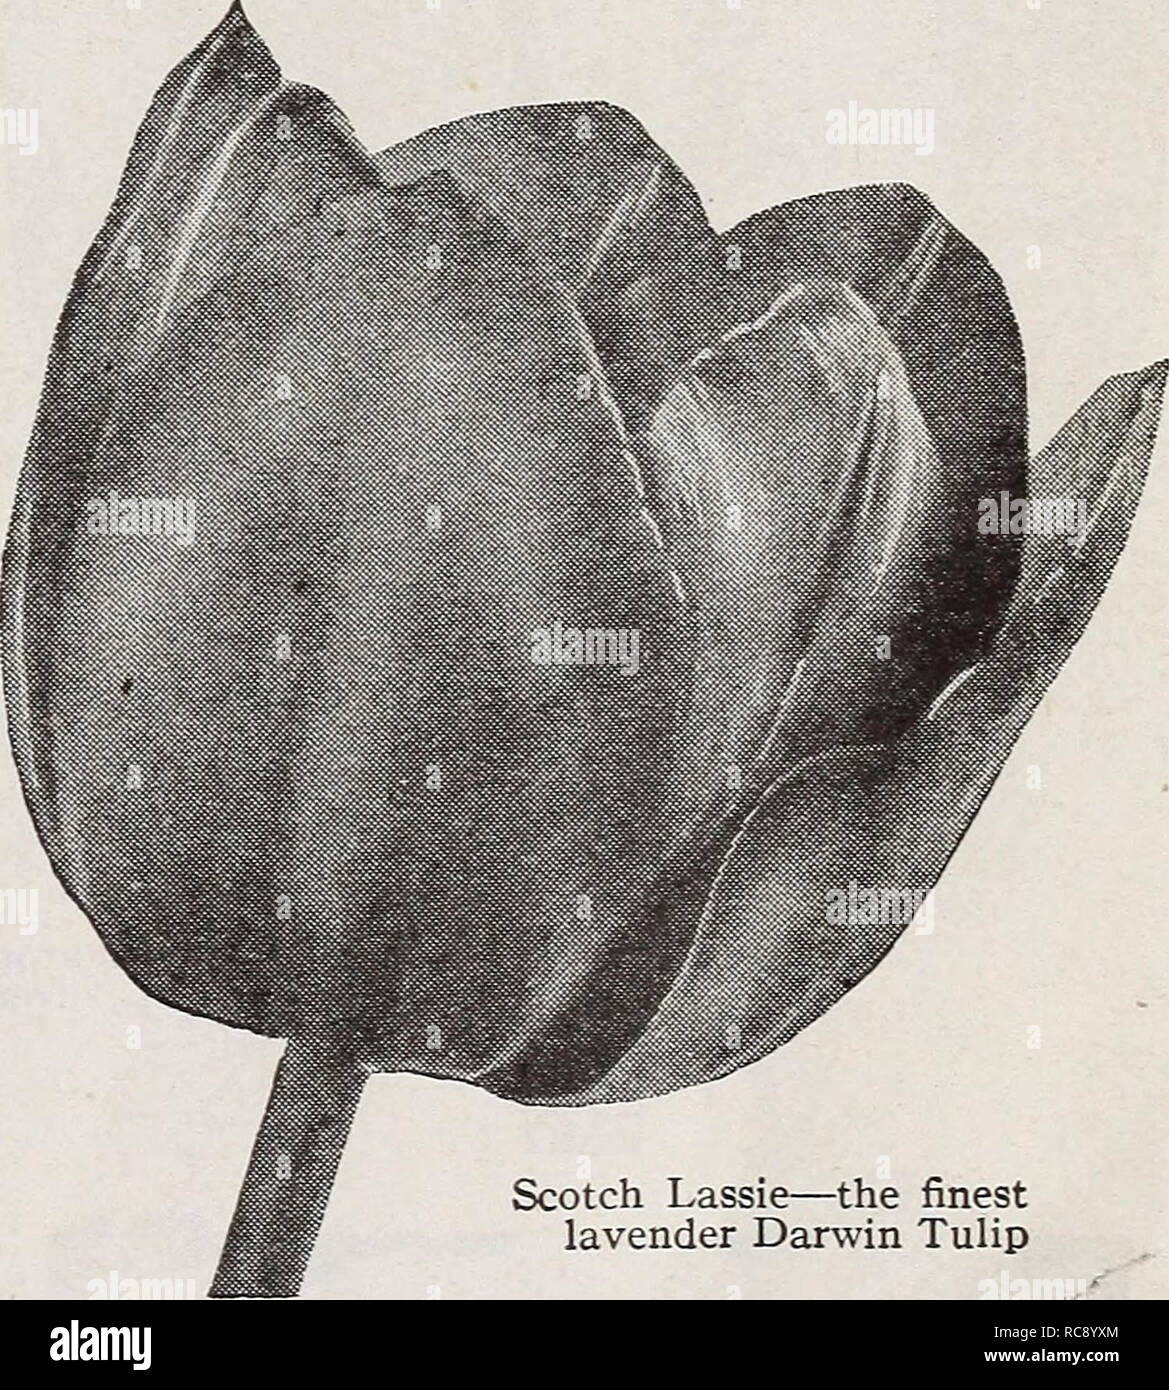 . Dreer's bulbs plants, shrubs and seeds for fall planting : autumn 1937. Bulbs (Plants) Catalogs; Flowers Seeds Catalogs; Gardening Equipment and supplies Catalogs; Nurseries (Horticulture) Catalogs; Vegetables Seeds Catalogs. Scotch Lassie—the finest lavender Darwin Tulip Venus—a medley of lovely pink shades Two SplShdid Bulb Planting Tools Hole-in-One Bulb Planter This serviceable tool removes the soil up to a depth of 5 inches making a perfect hole for planting many kinds of bulbs. Sent postpaid for 60c. Please note that these images are extracted from scanned page images that may have bee Stock Photo